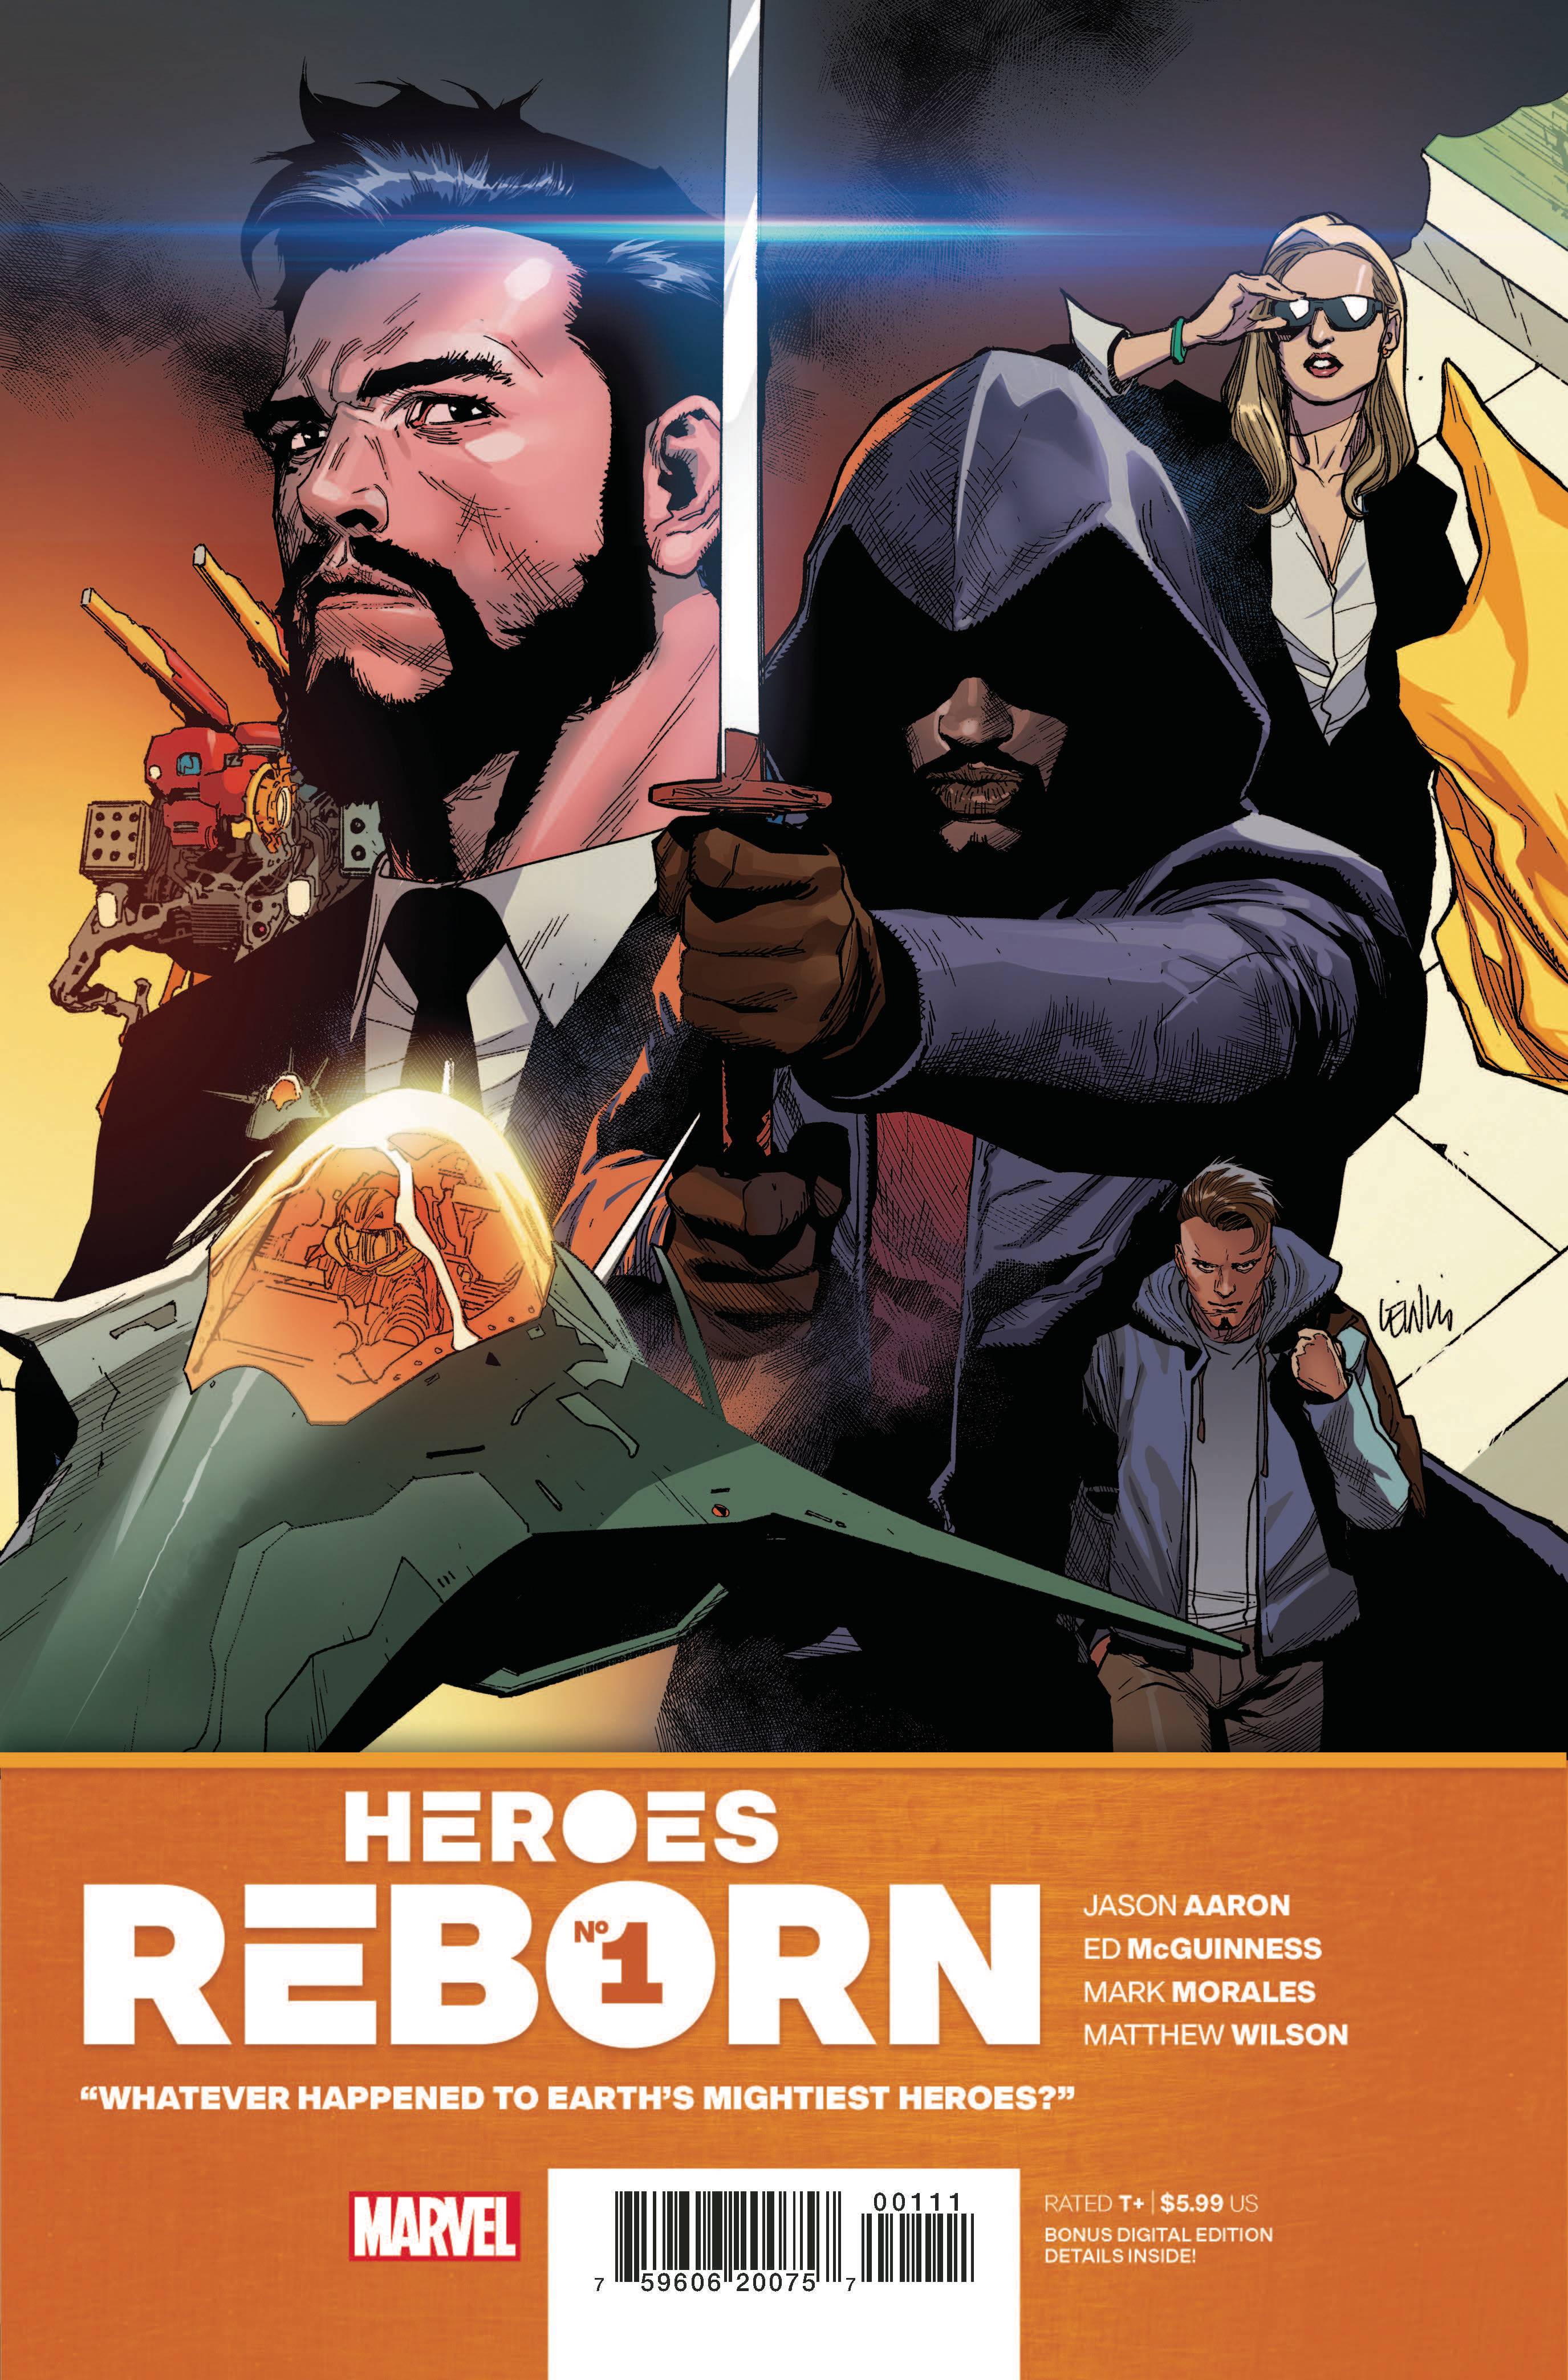 HEROES REBORN #1 (OF 7) | Game Master's Emporium (The New GME)